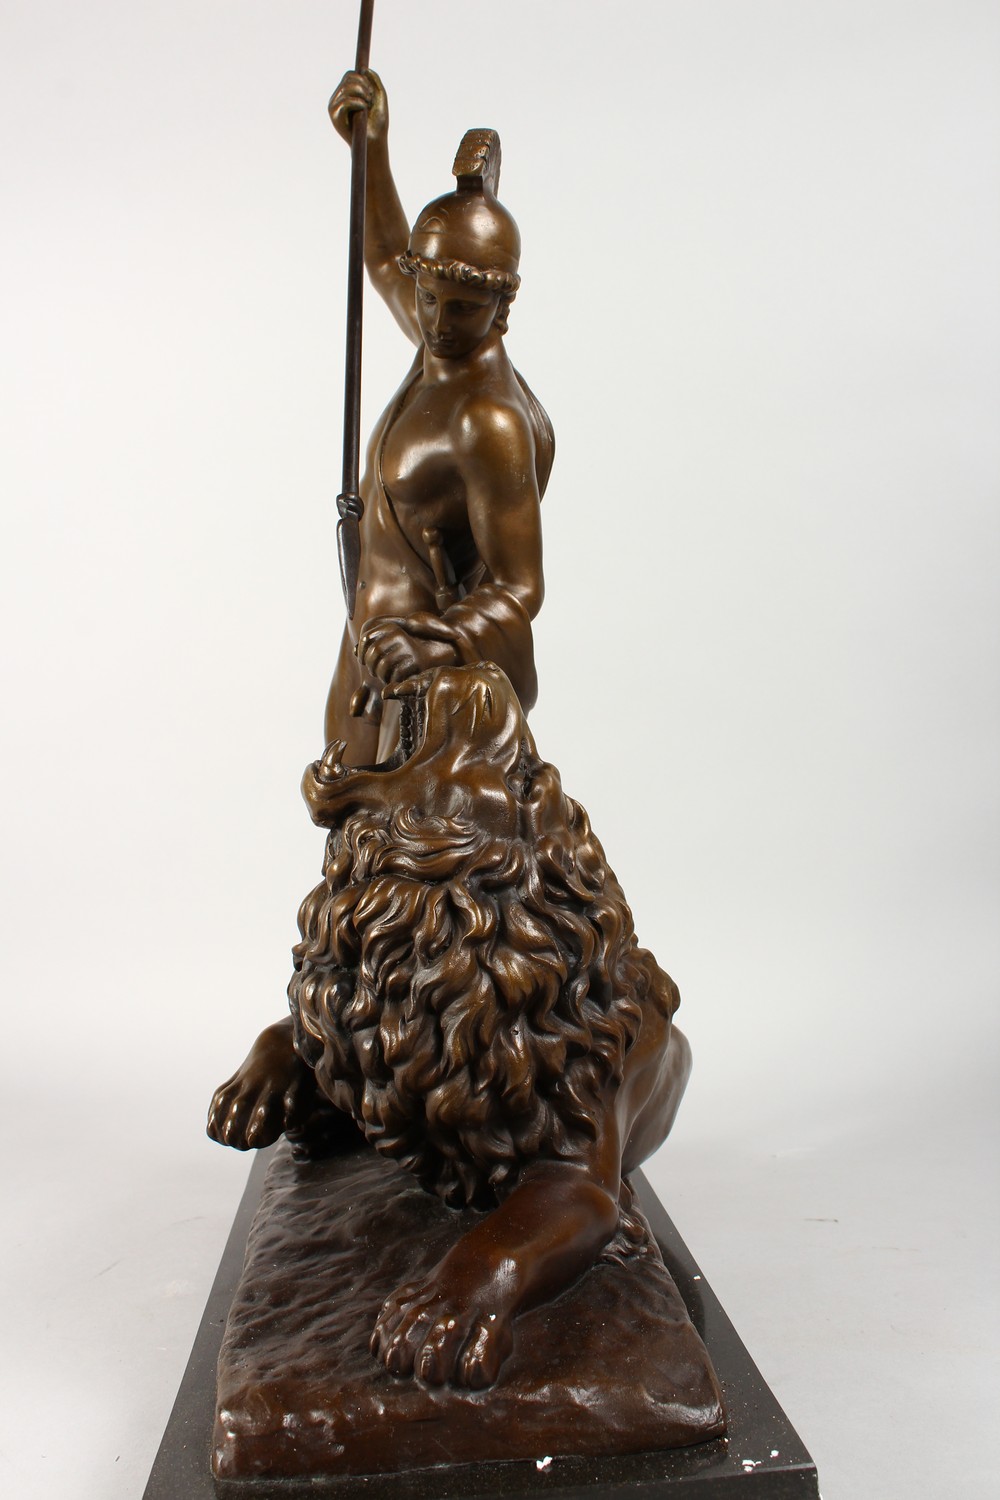 A GOOD BRONZE CLASSICAL GROUP, a Roman gladiator spearing a lion, on a marble base. 24ins high. - Image 2 of 6